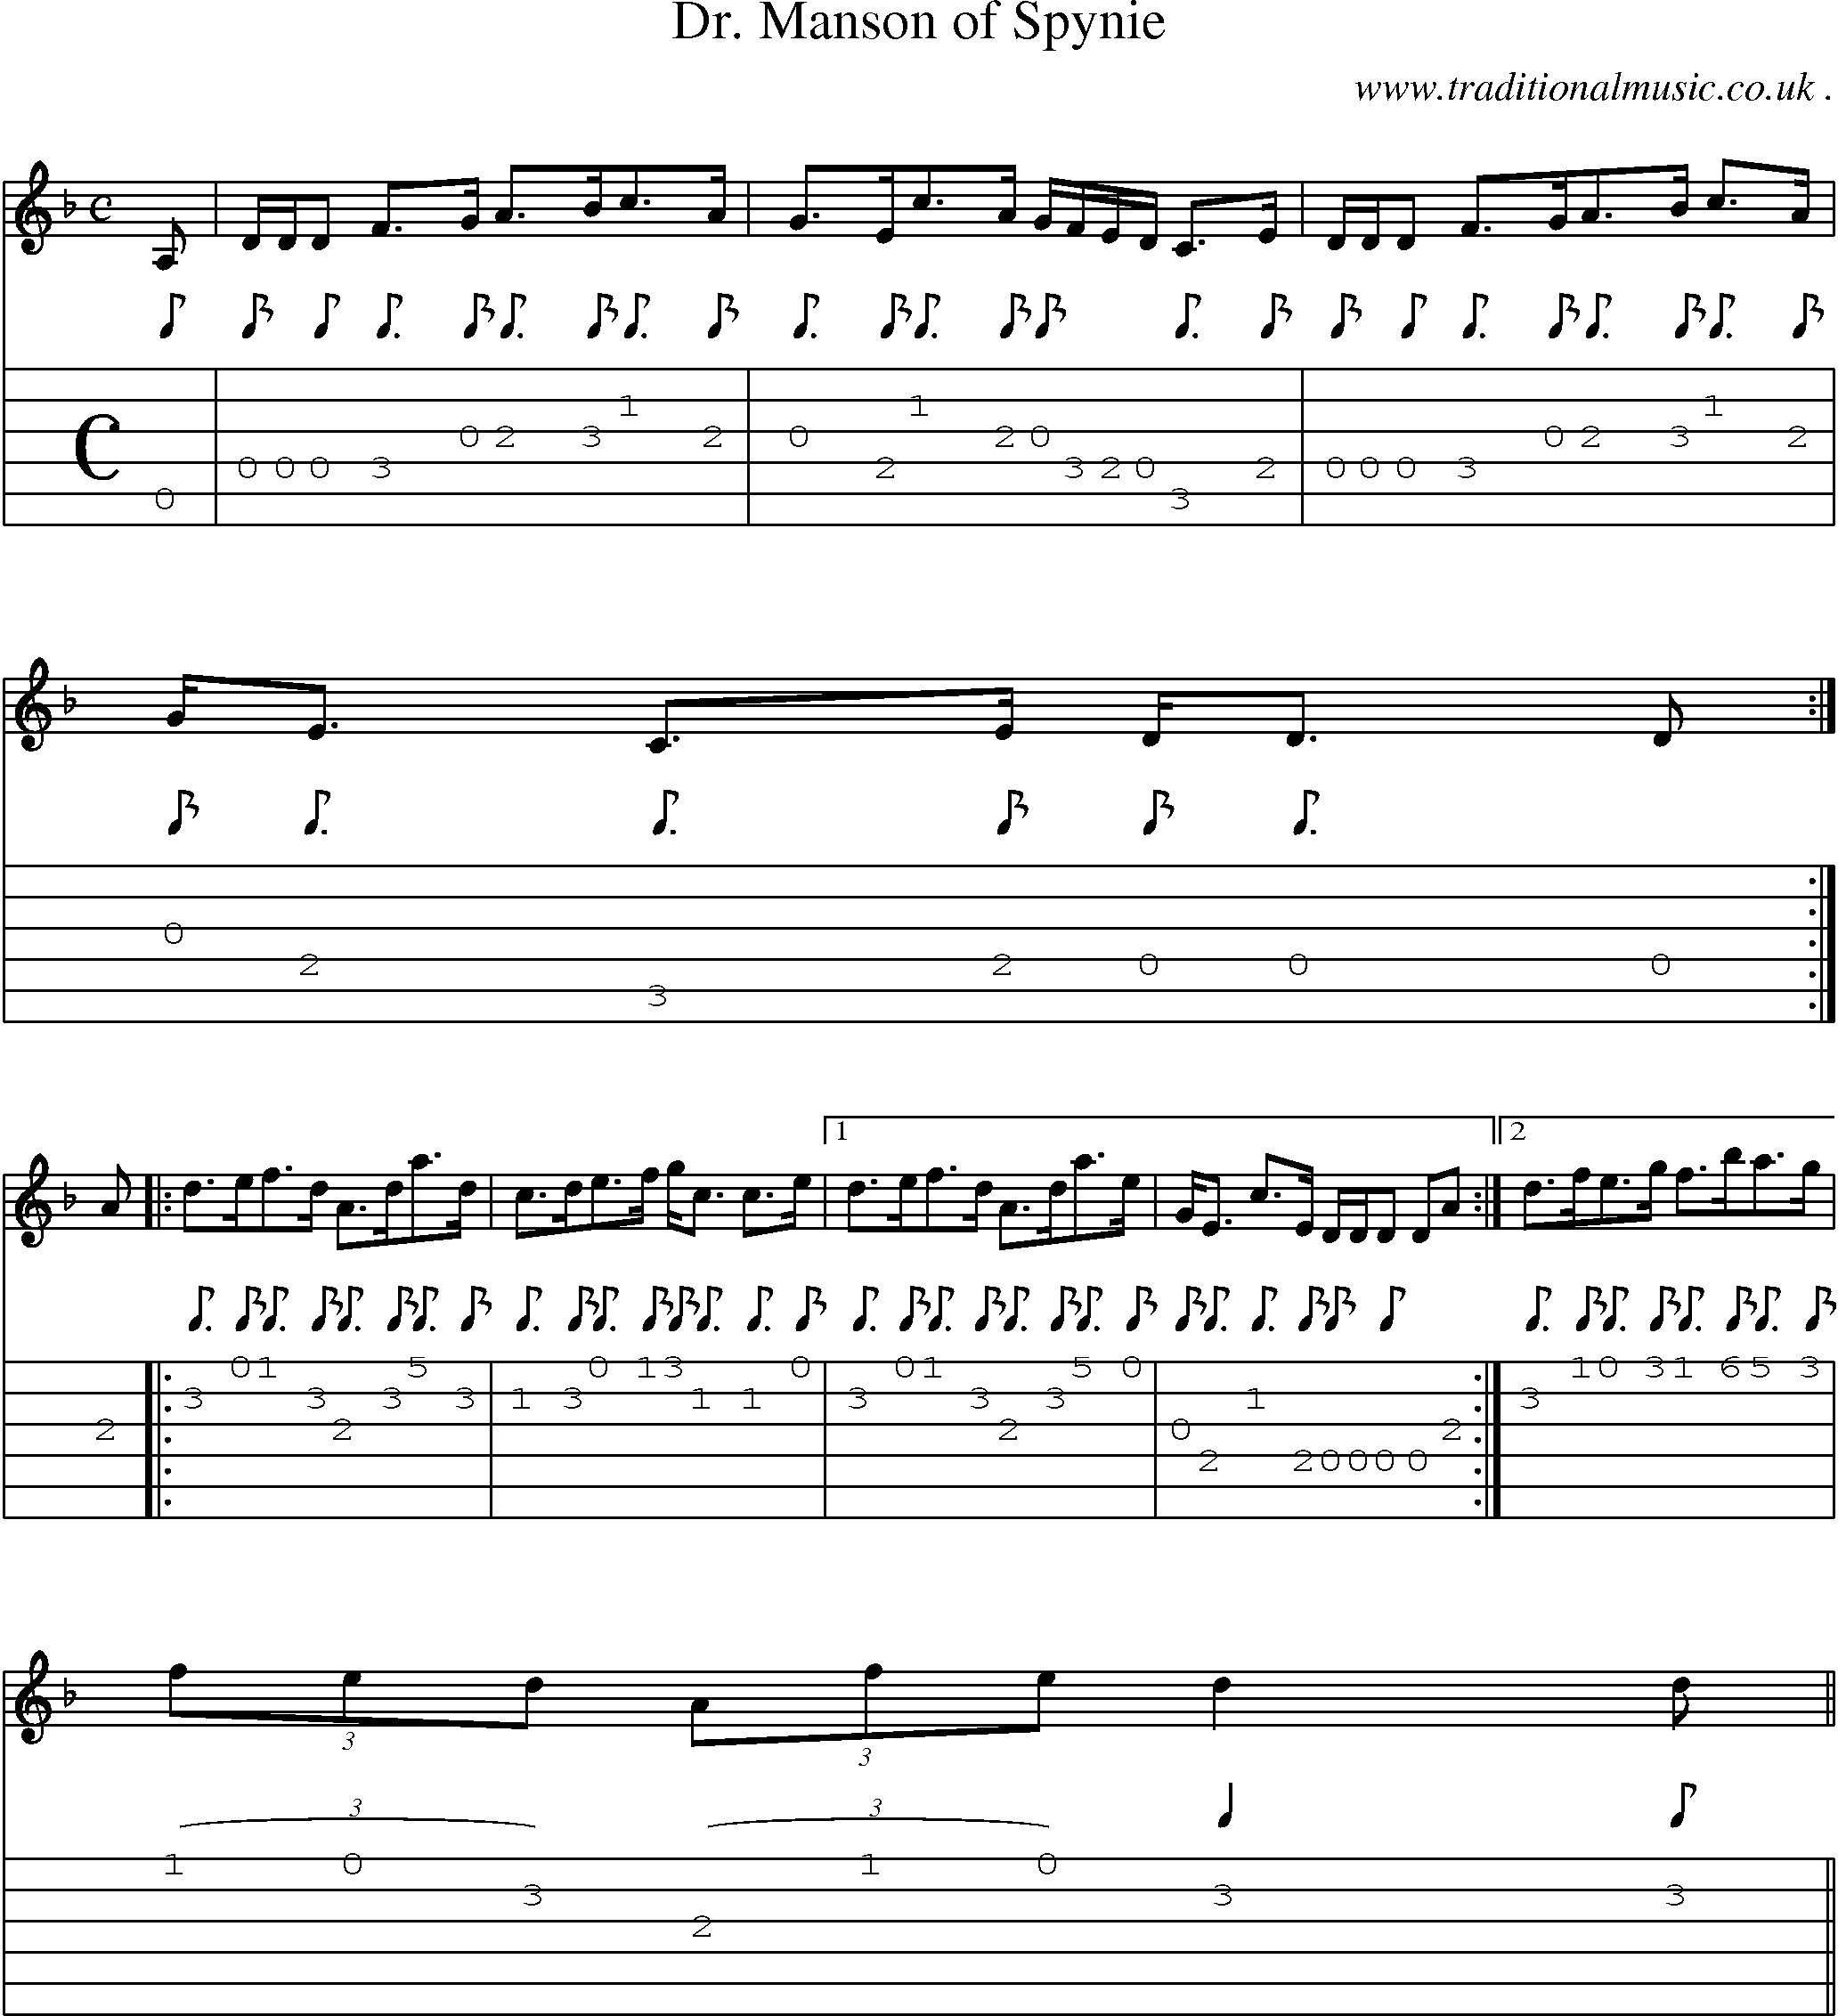 Sheet-music  score, Chords and Guitar Tabs for Dr Manson Of Spynie